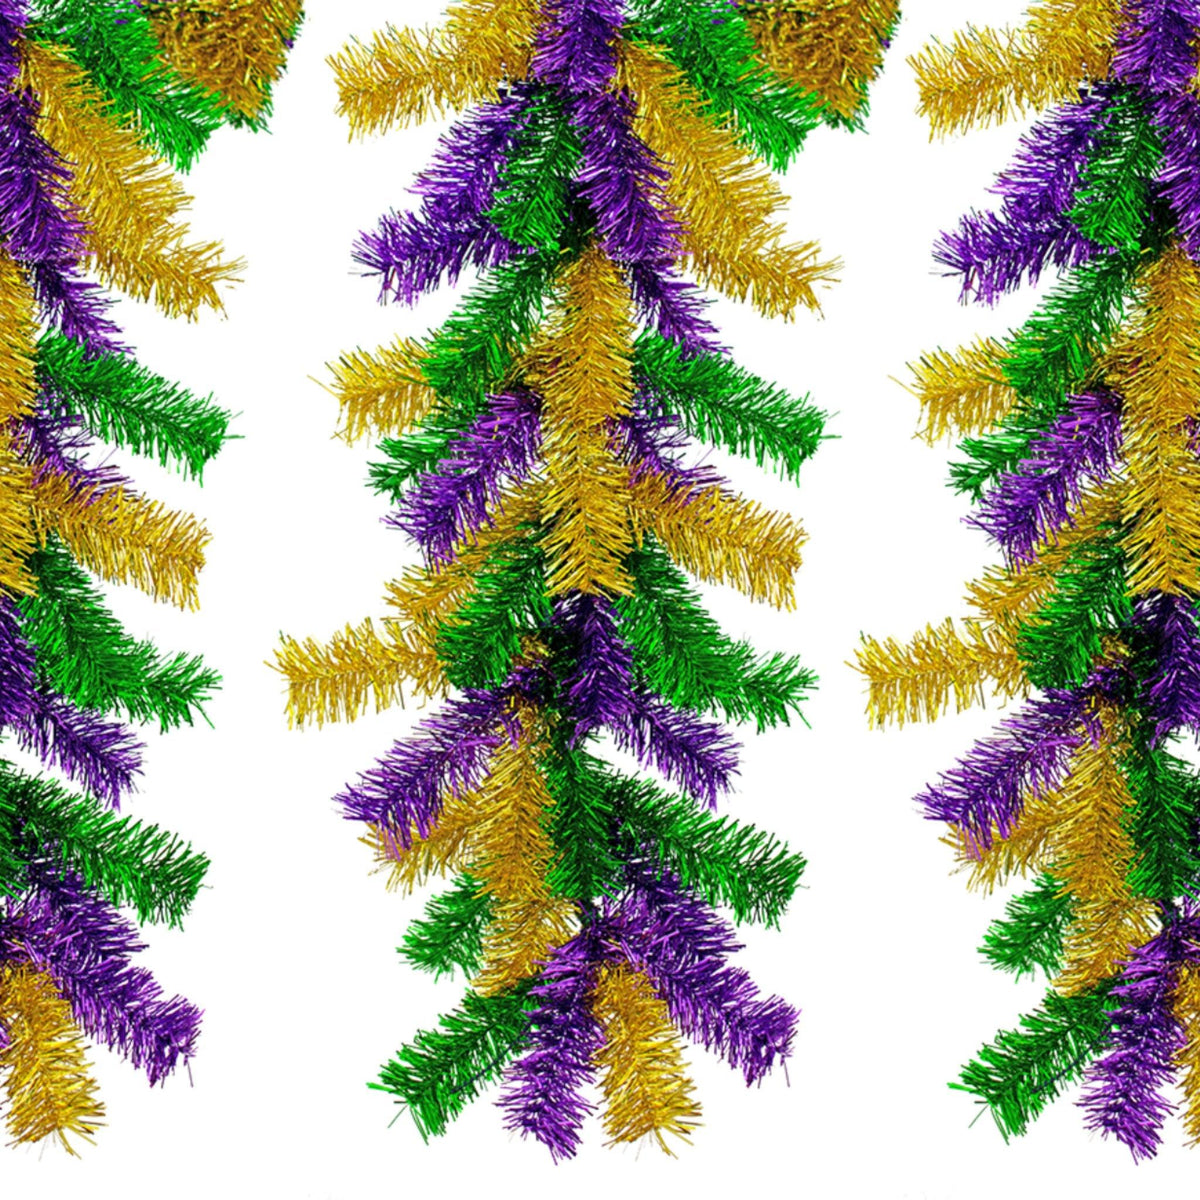 Shop now for Lee Display's brand new 6FT Mardi Gras themed mix tinsel brush garlands on sale at leedisplay.com.  Multicolor mixed brush.